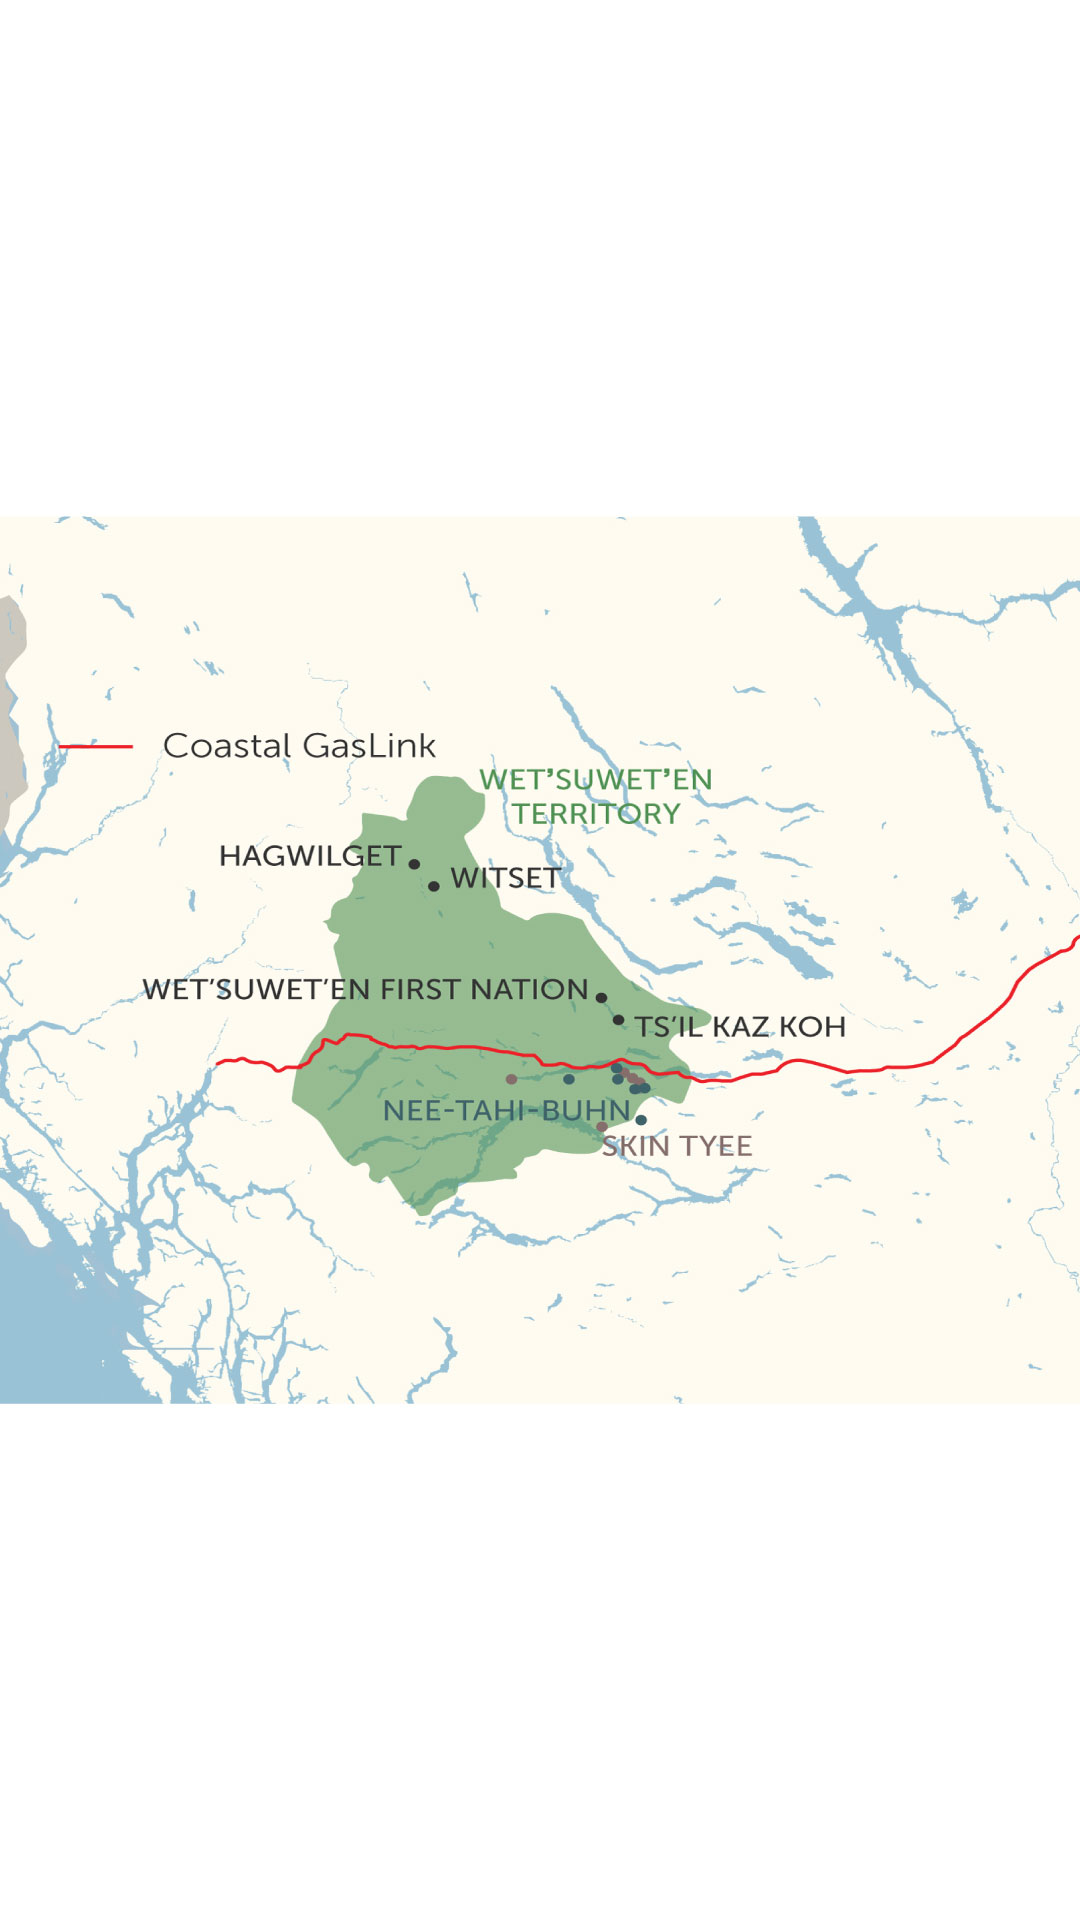 Map of Coastal GasLink pipeline as it intersects with Wet'suwet'en territory, and the six reserves on the territory, in northwestern B.C.